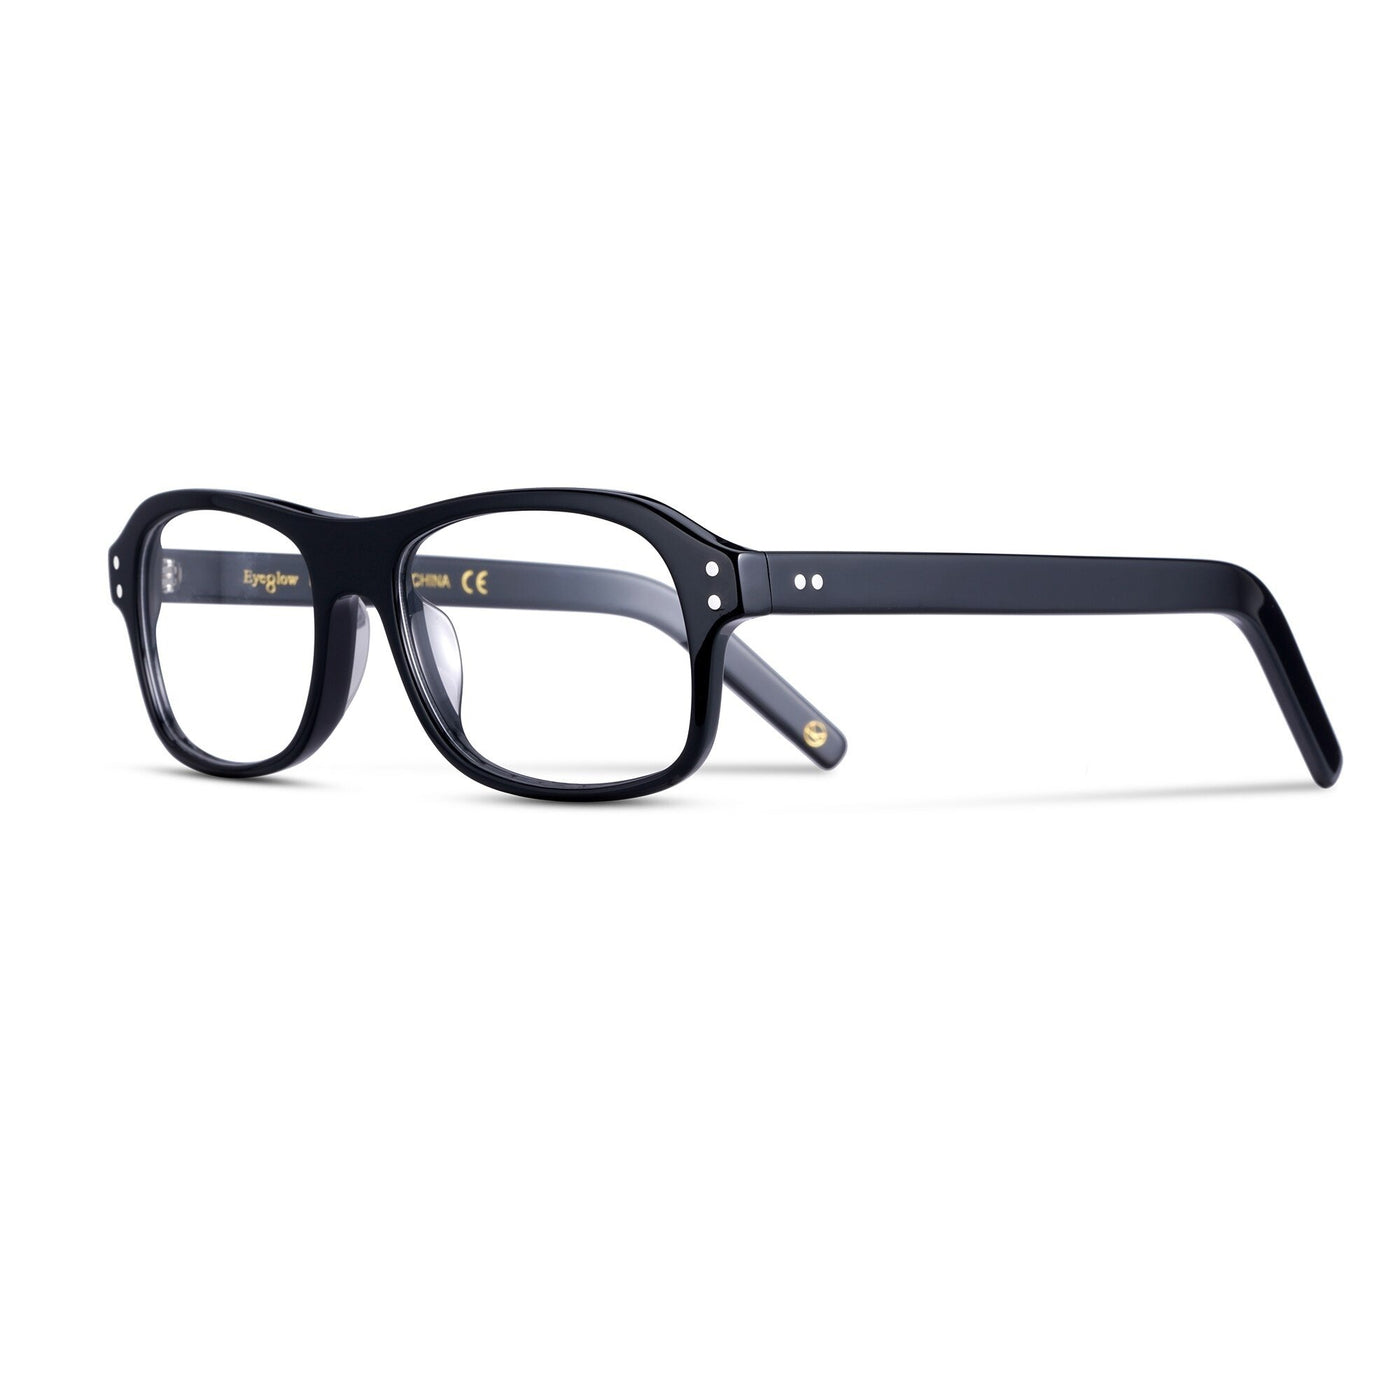 Classic Square Clear Lens Frame For Unisex-Unique and Classy